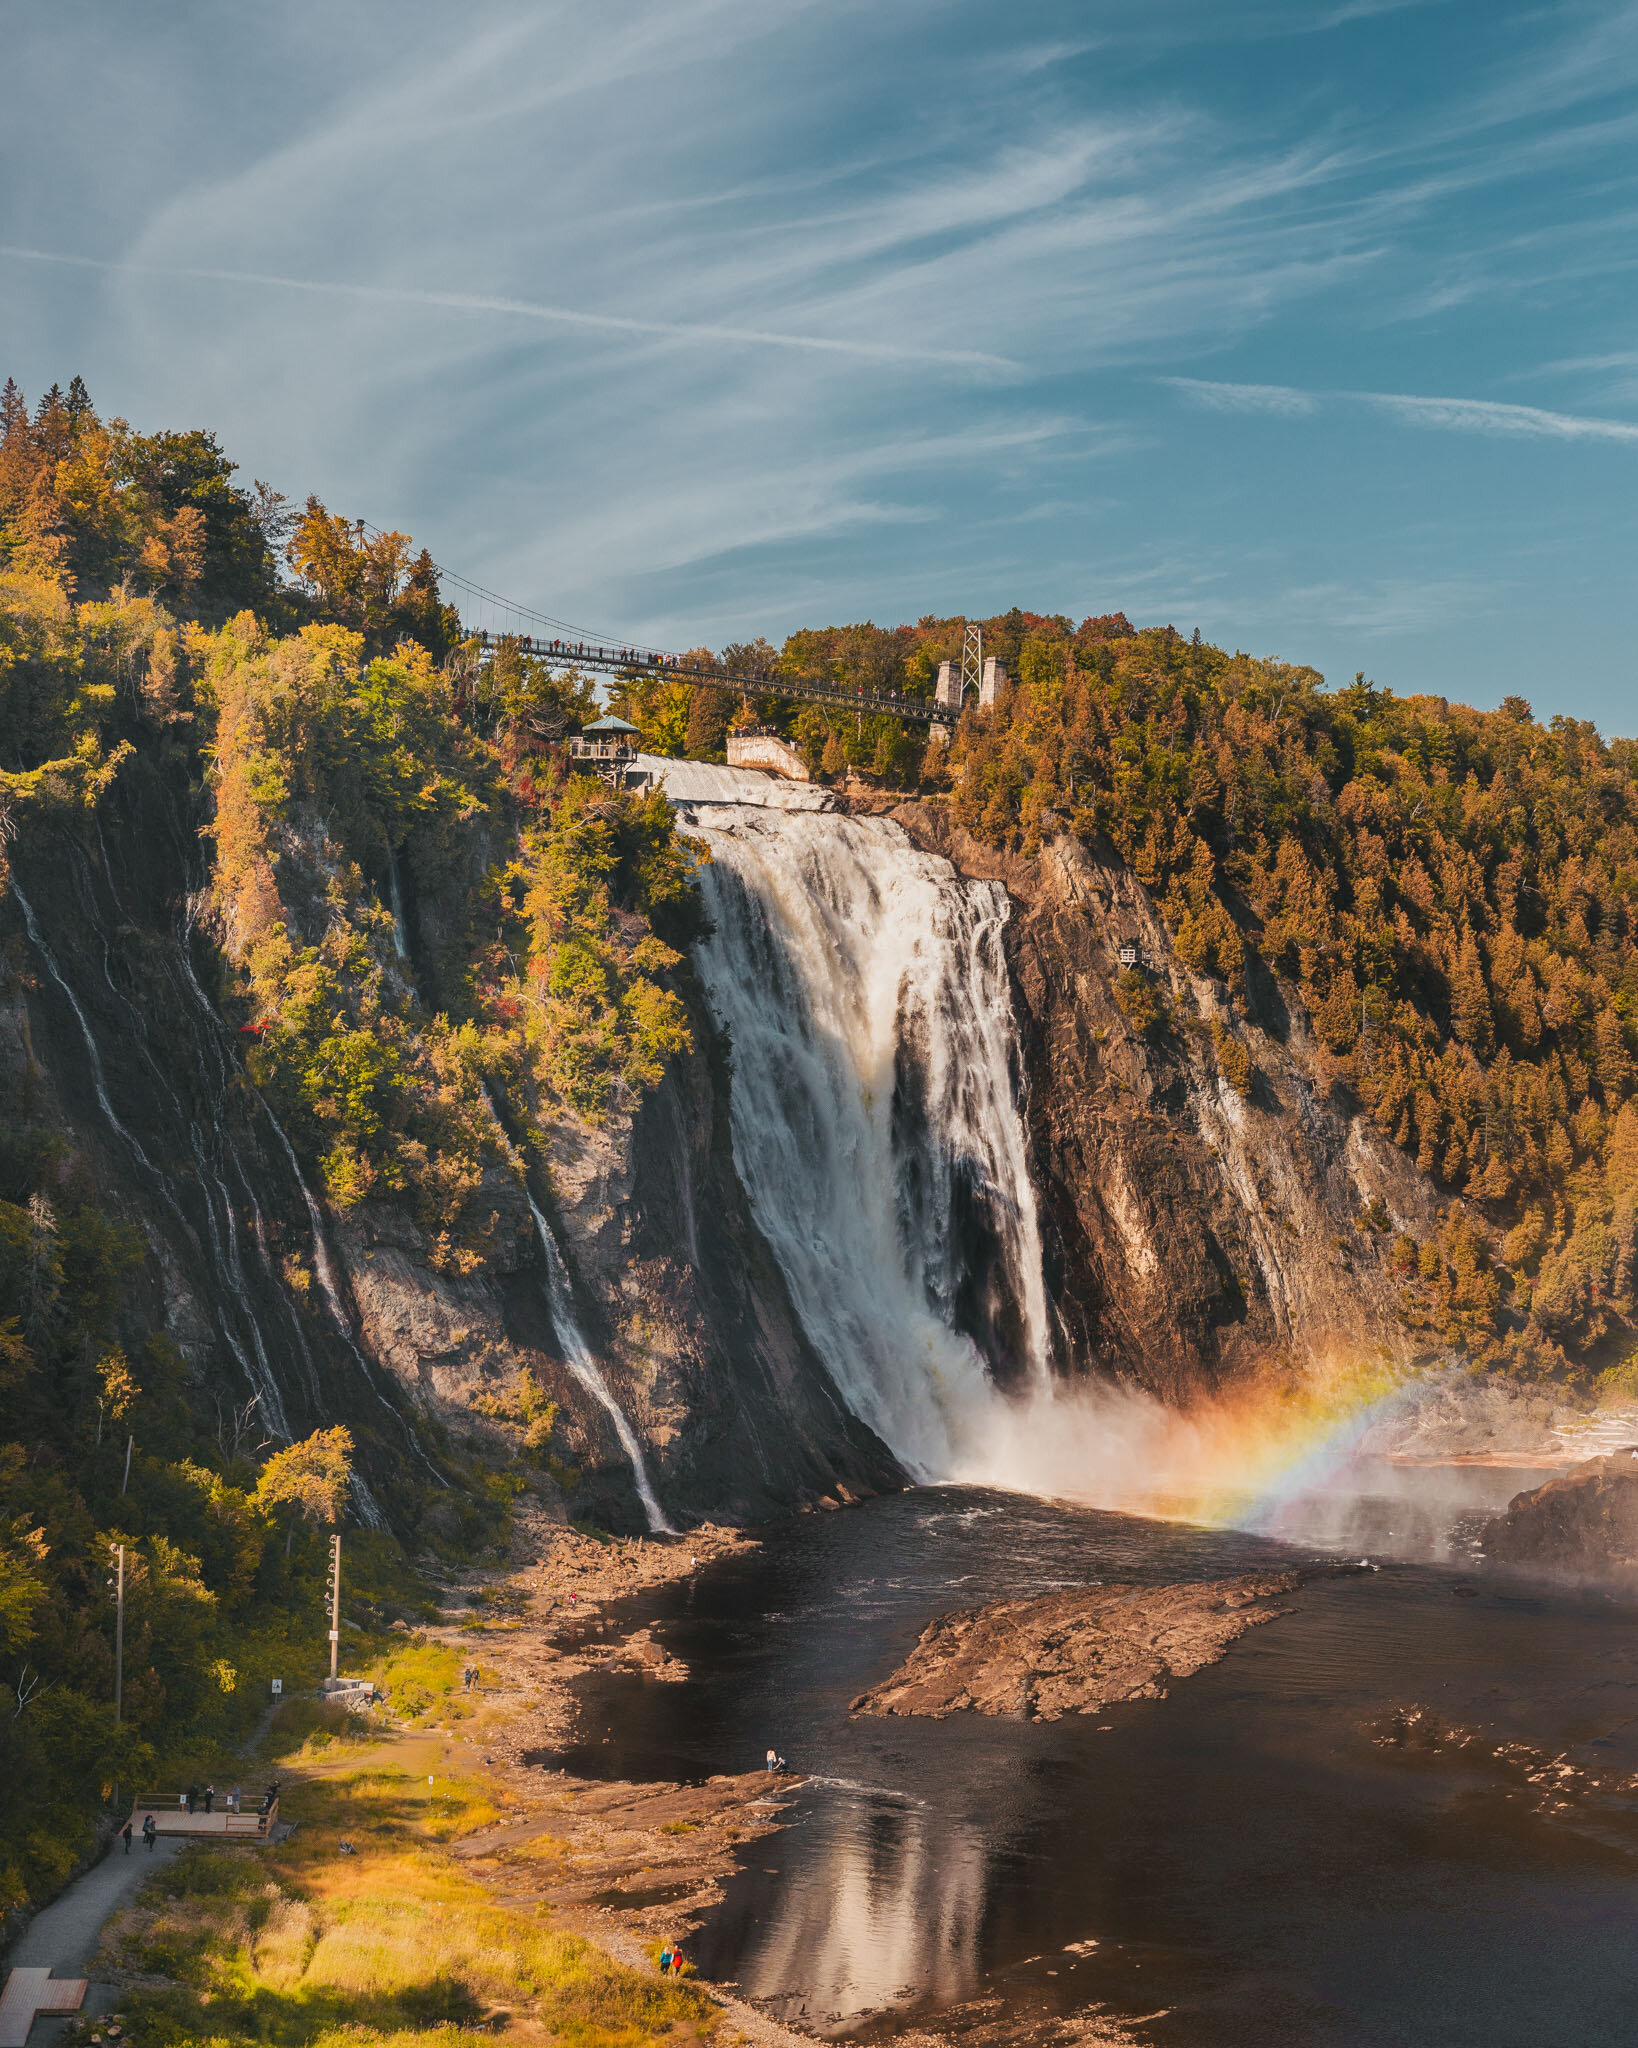 Montmorency Falls in Quebec City // Cruise Review: 11-Day New England & Canada on the Seabourn Quest // #readysetjetset #cruise #luxury #travel #cruising #canada